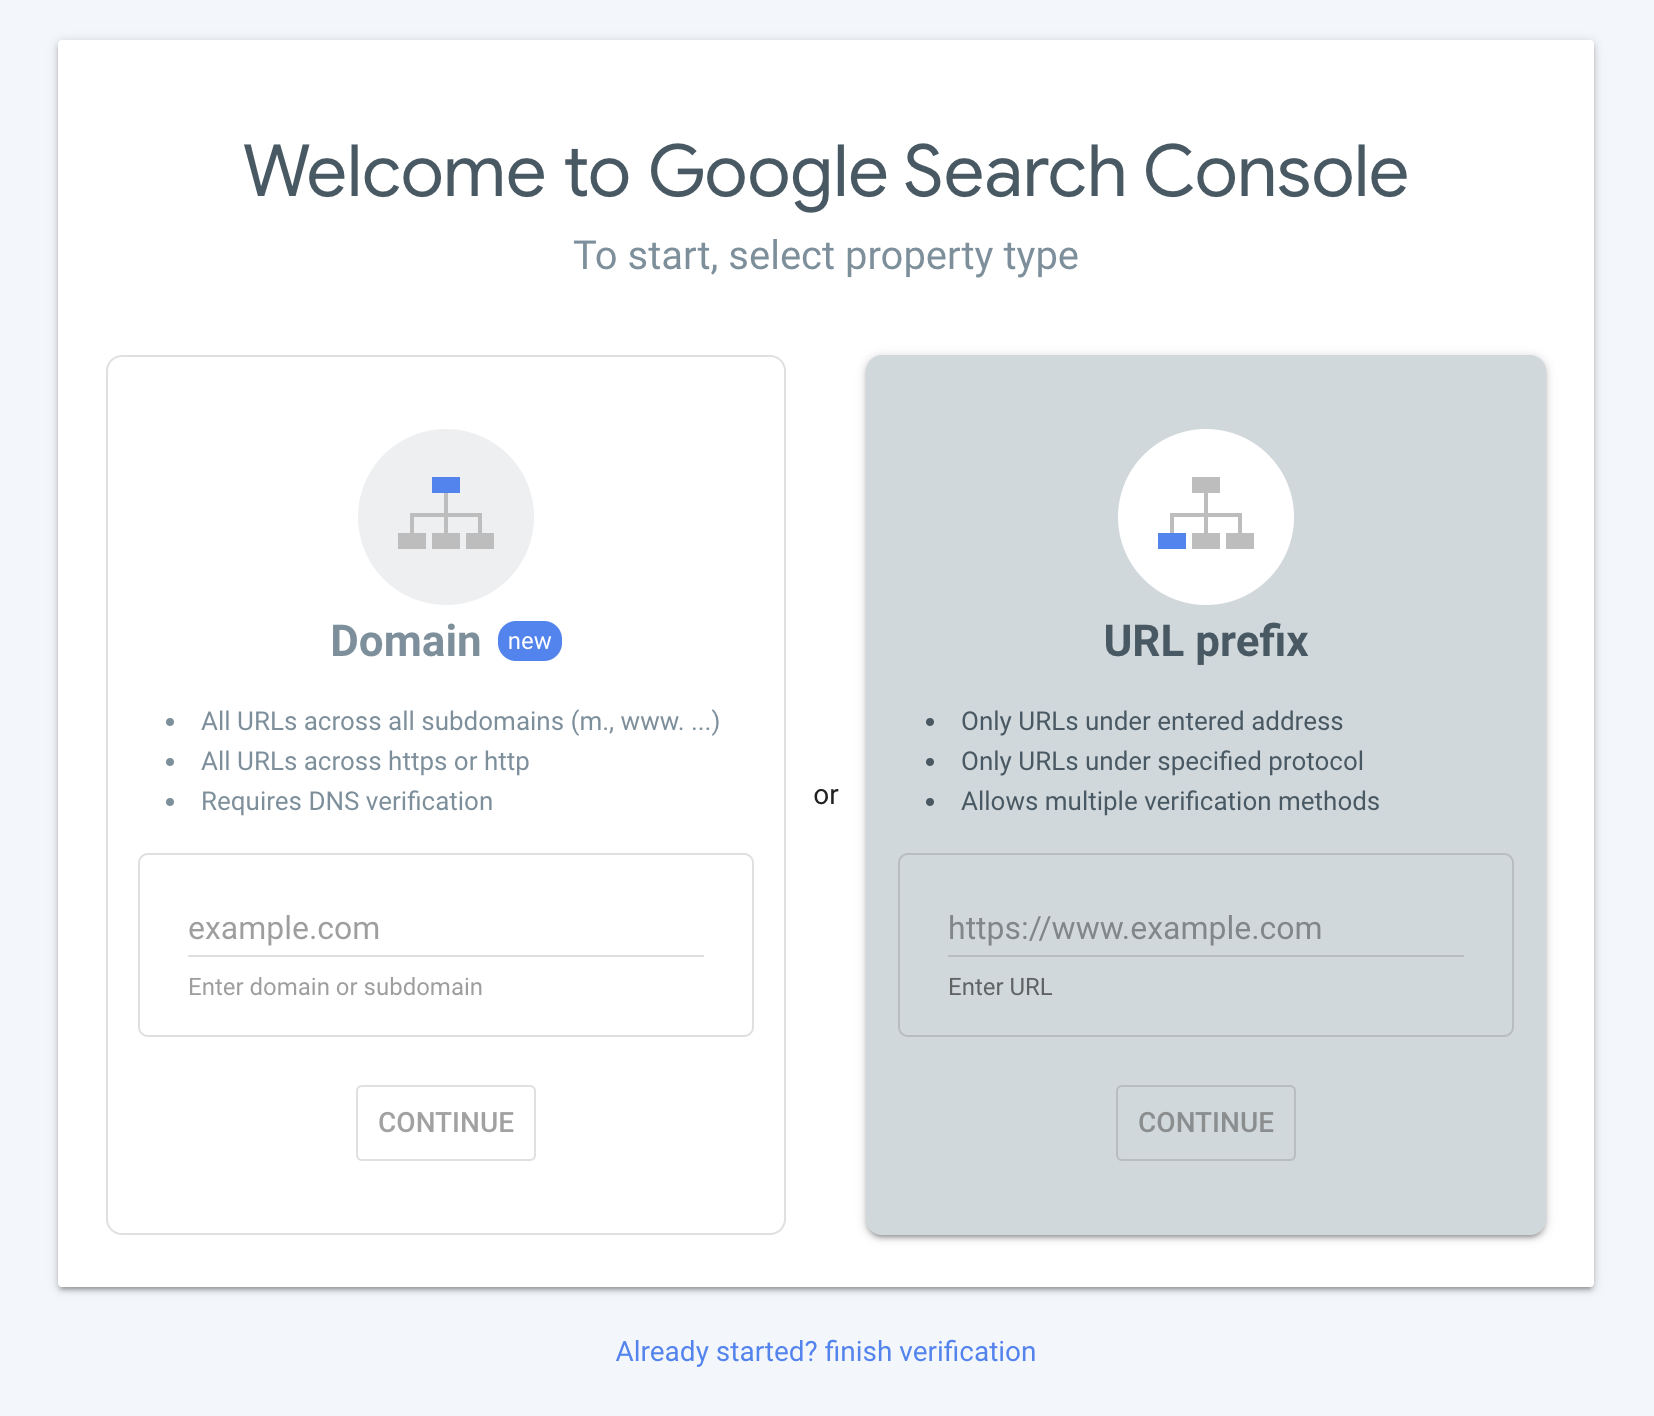 Typing in URL prefix to google search console